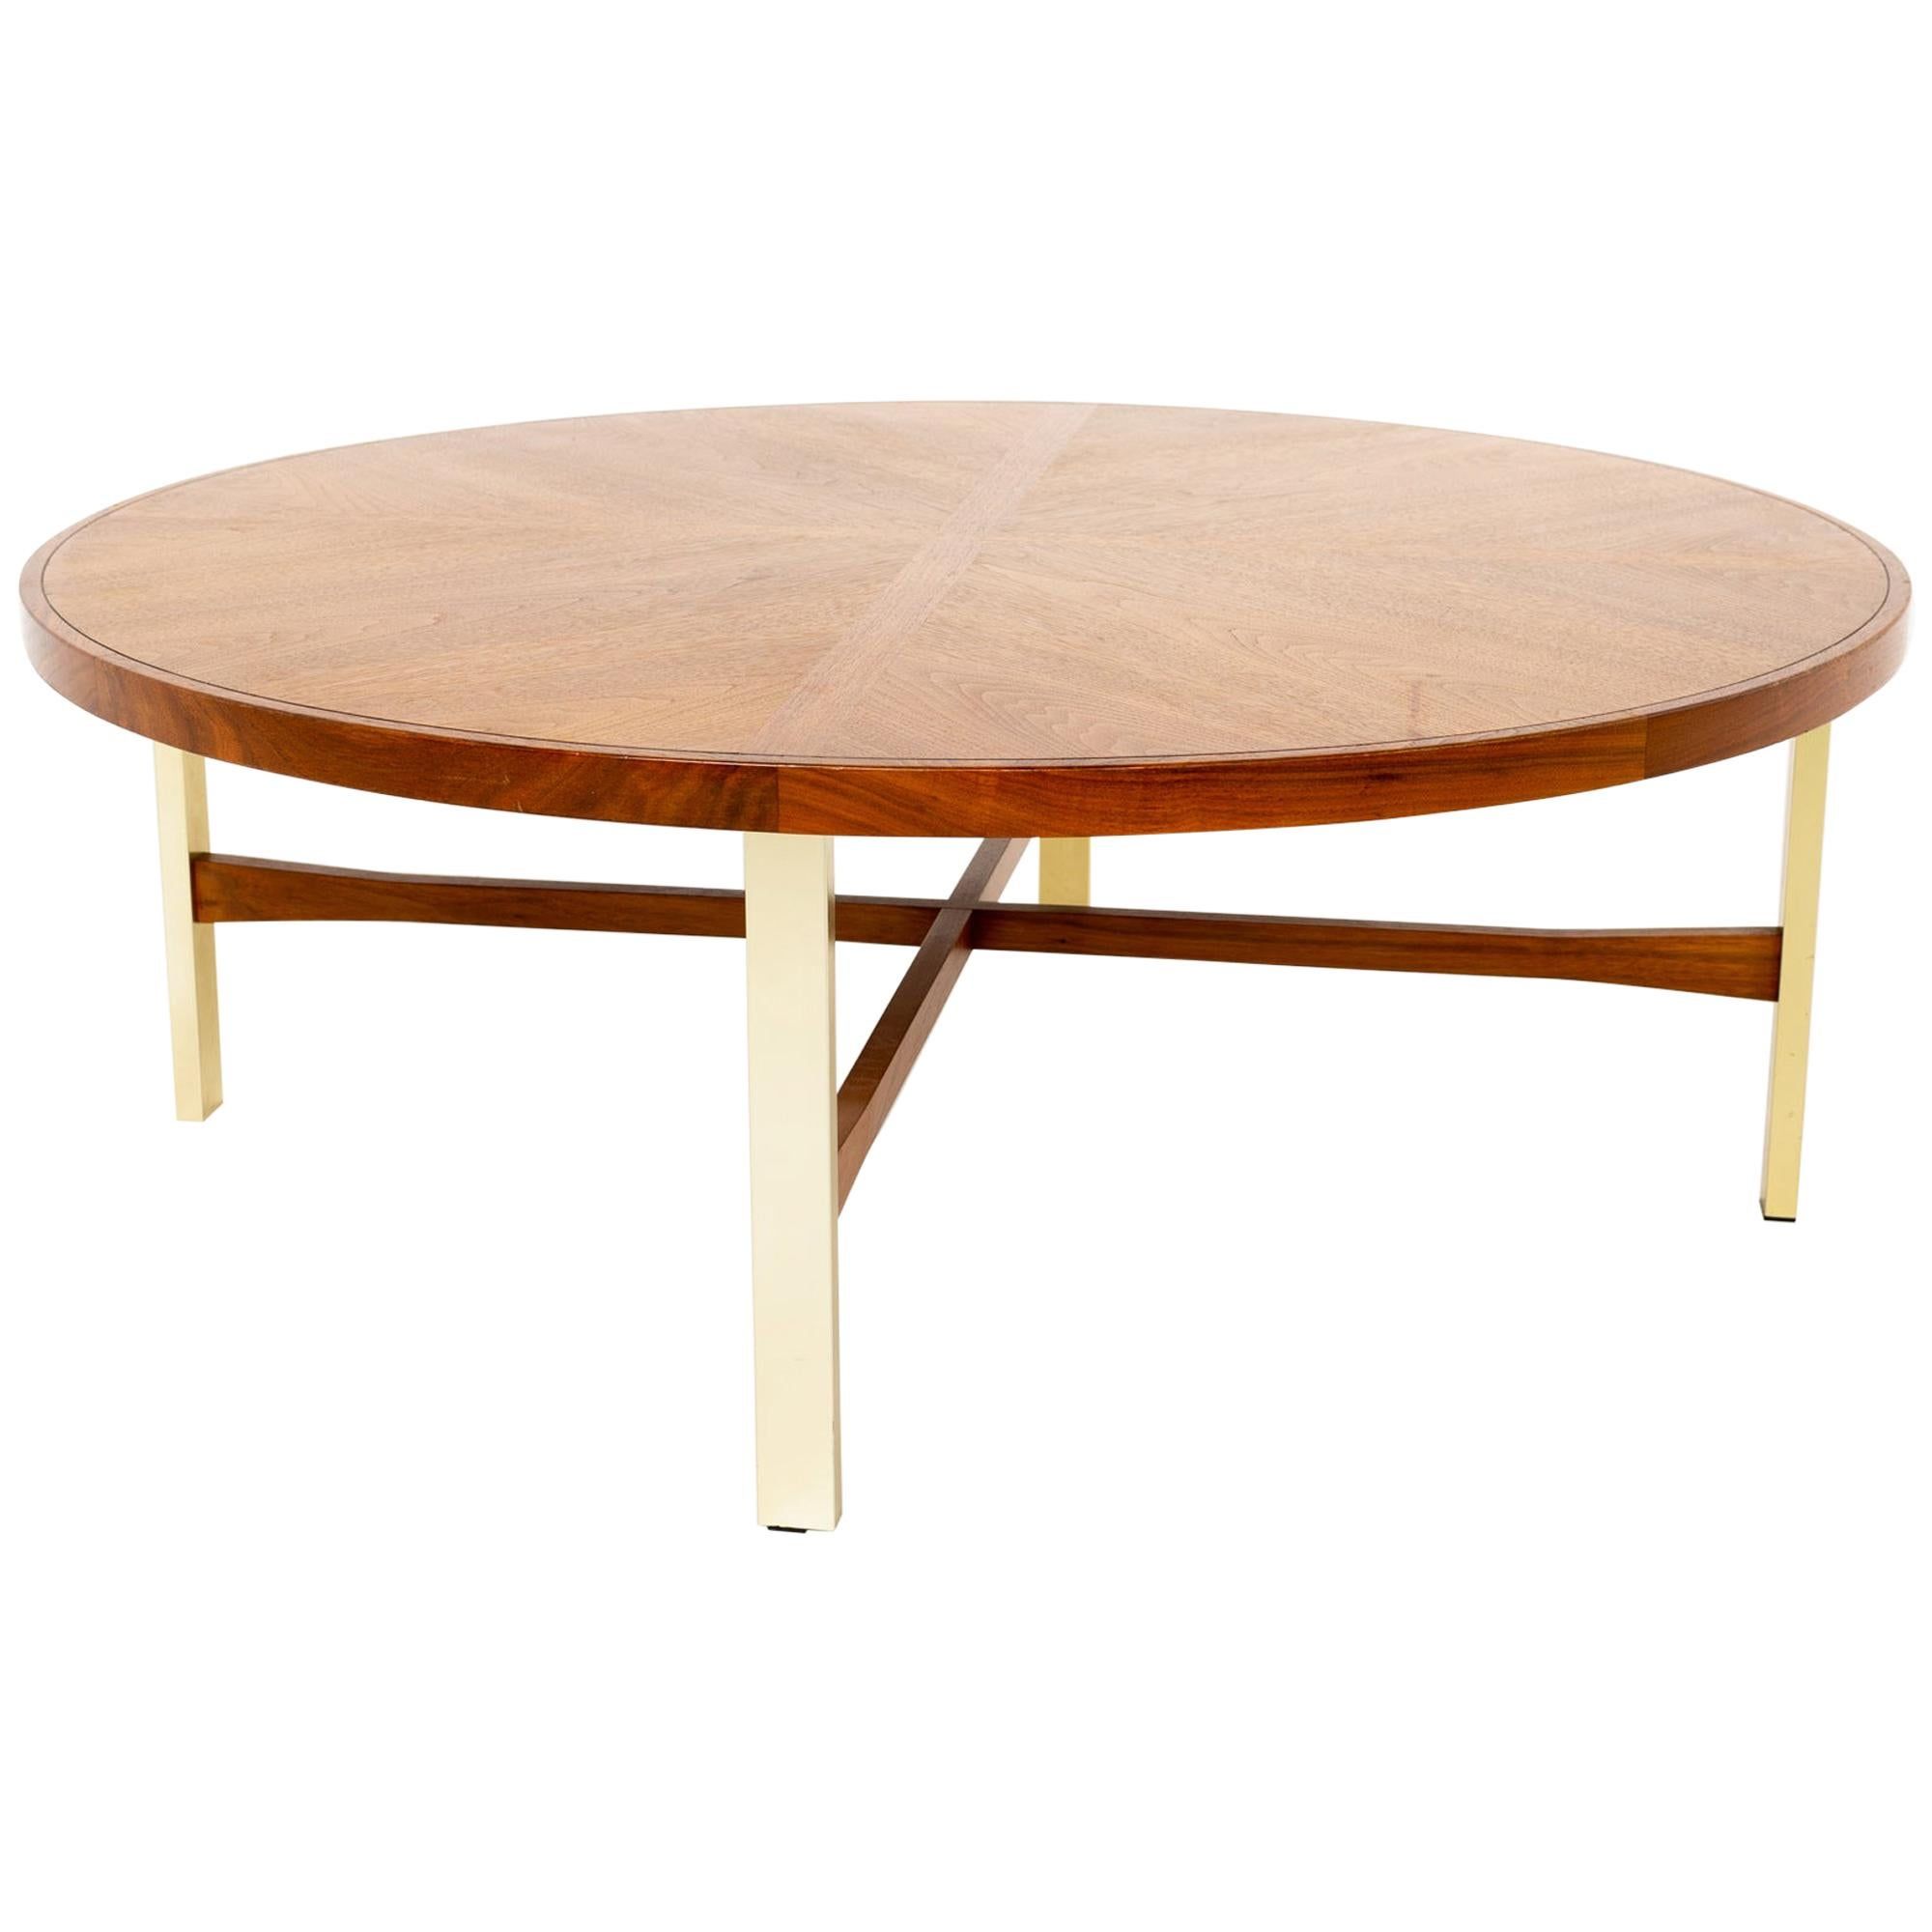 Drexel Heritage Mid Century Walnut And Brass Round Coffee Table At 1stdibs Inside American Heritage Round Coffee Tables (View 15 of 15)